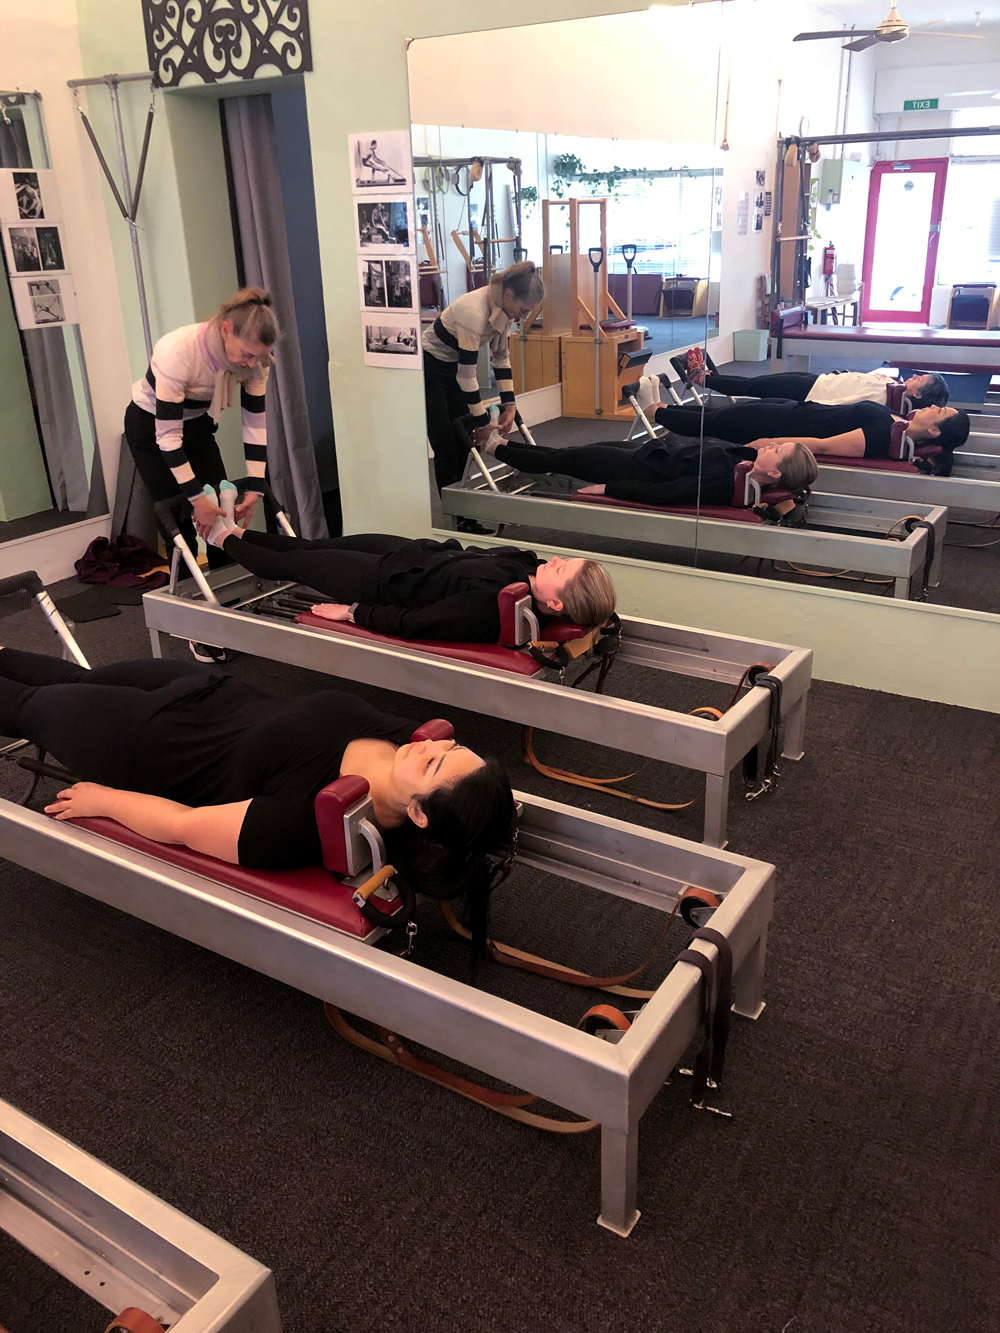 book & slay that pilates class w/ this guide! 🤭, Gallery posted by  jiaxian